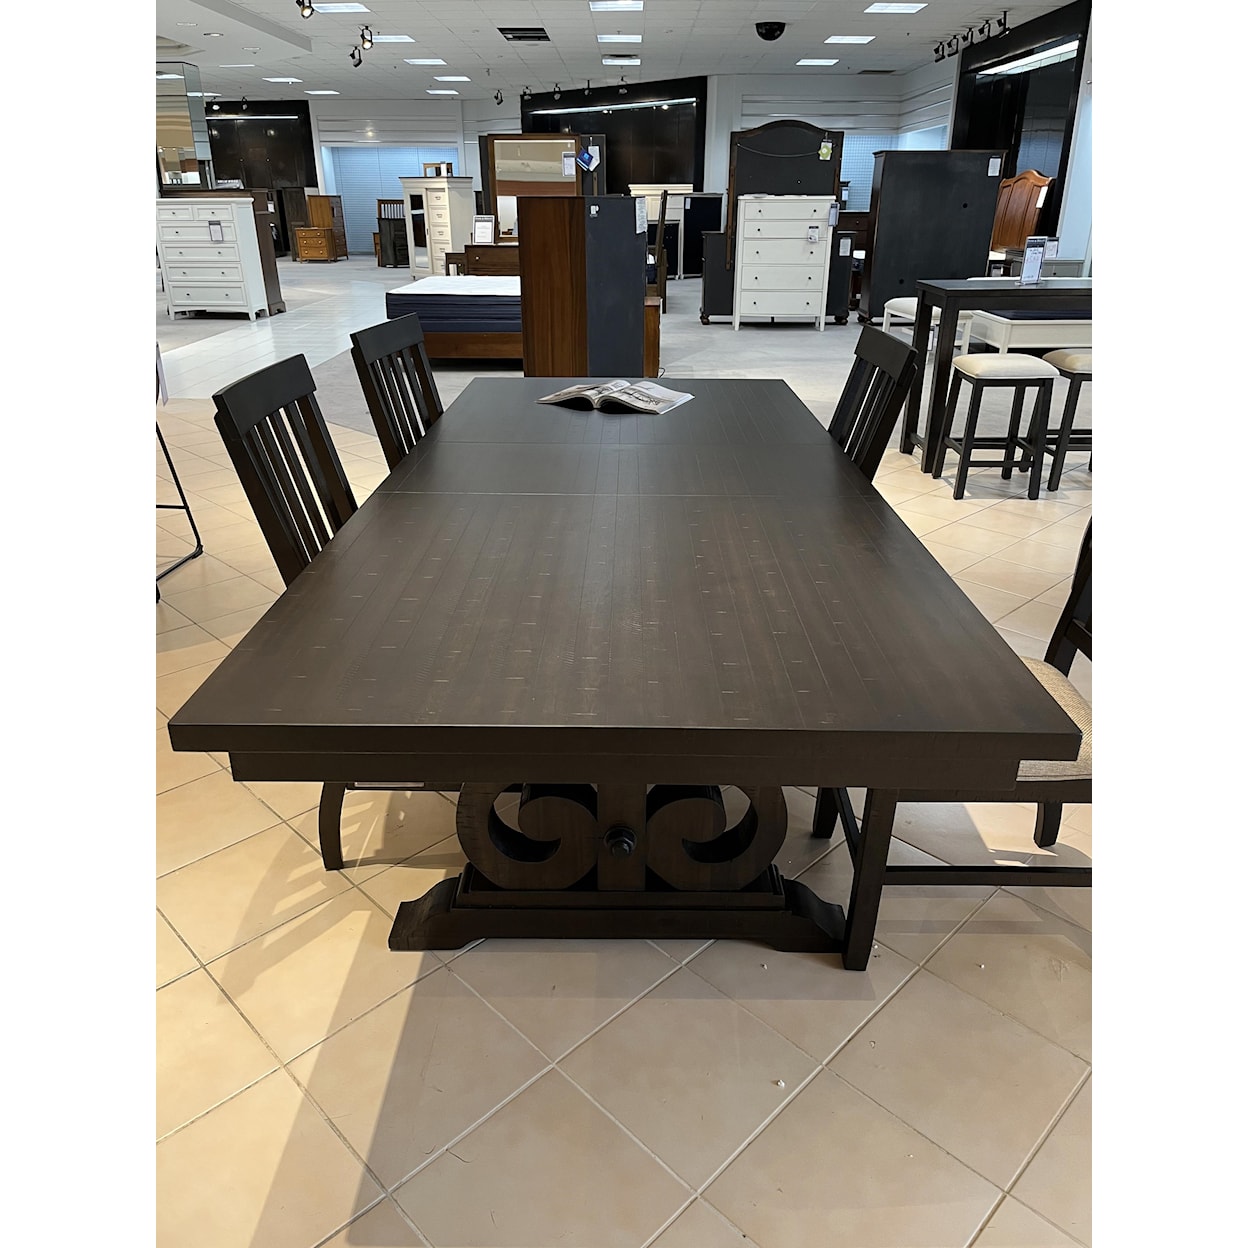 Elements International Dining Room Dining Table